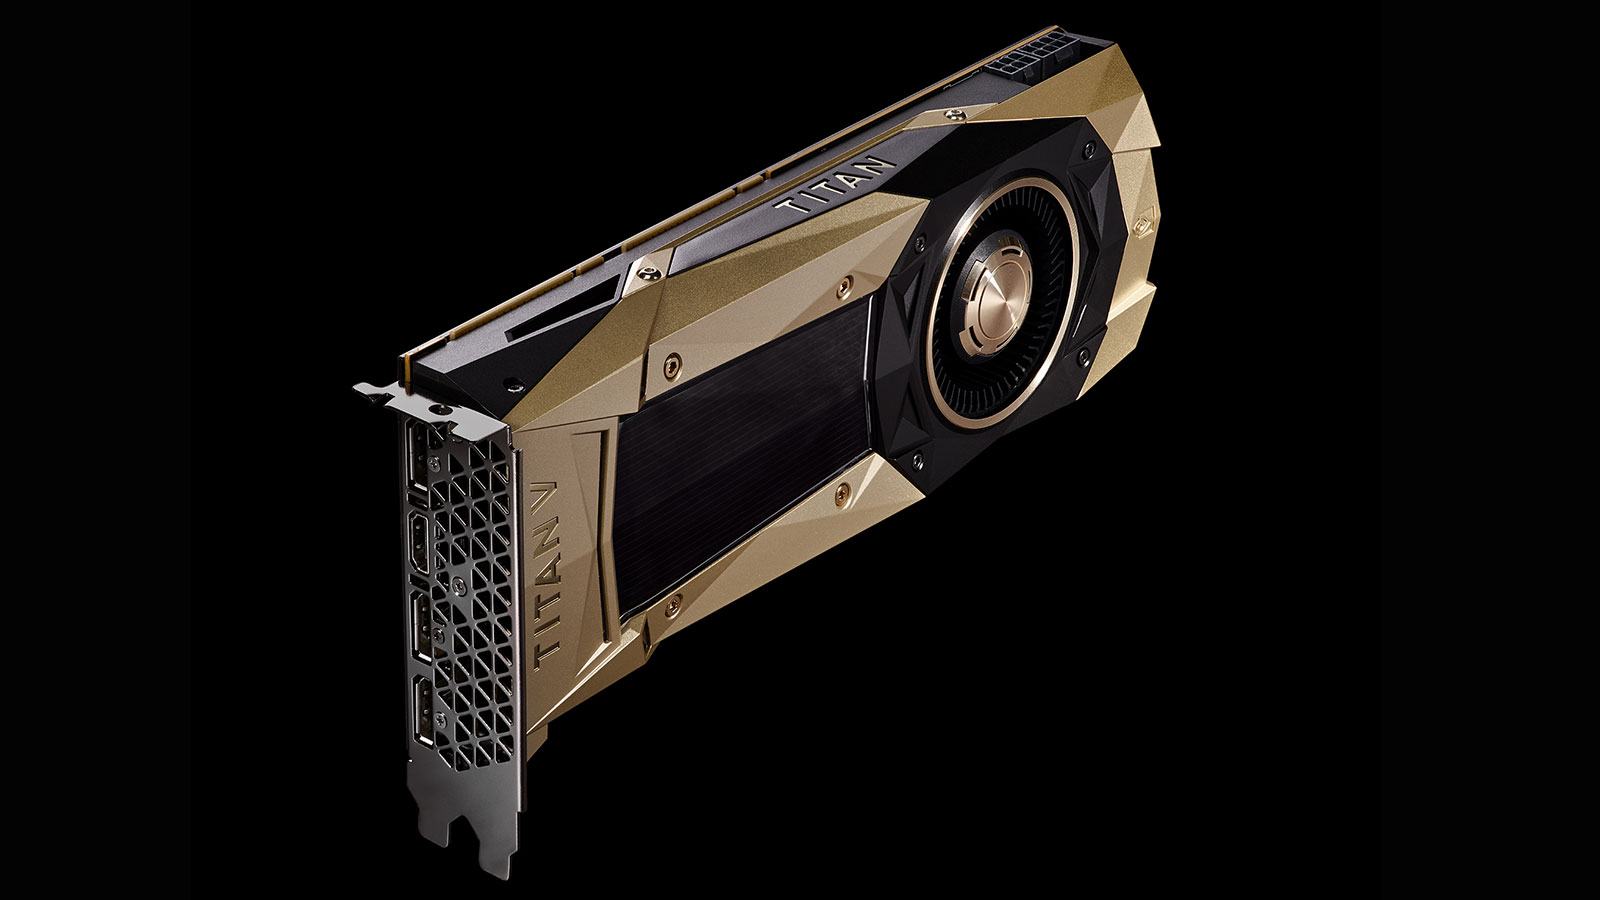 Nvidia introduced Titan V — the most powerful graphics card in the world